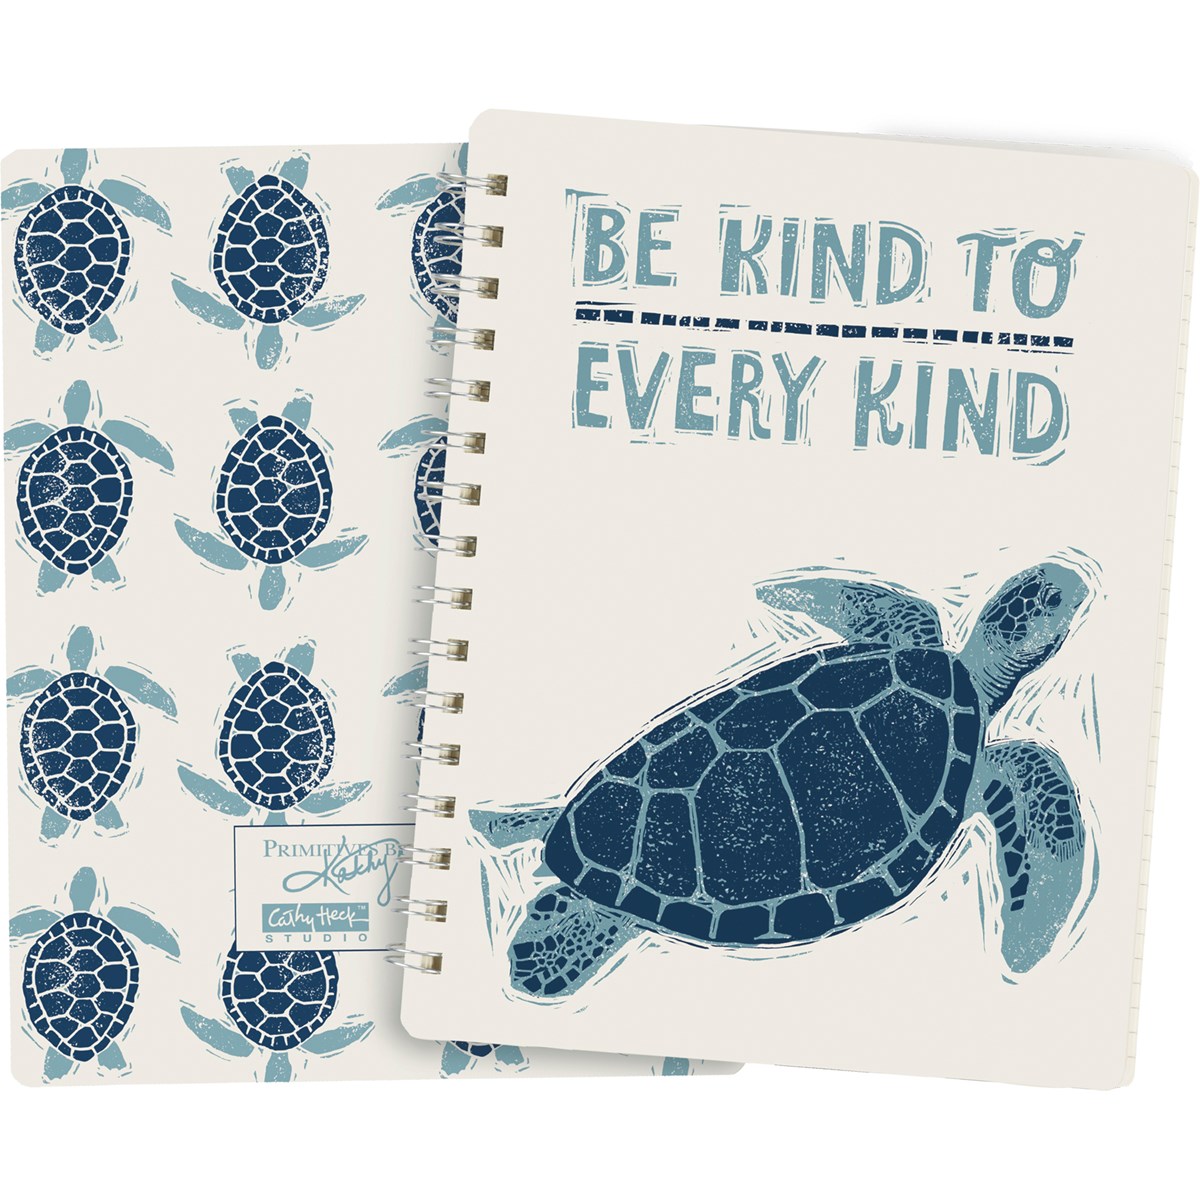 Spiral Notebook - Be Kind To Every Kind - 5.75" x 7.50" x 0.50" - Paper, Metal